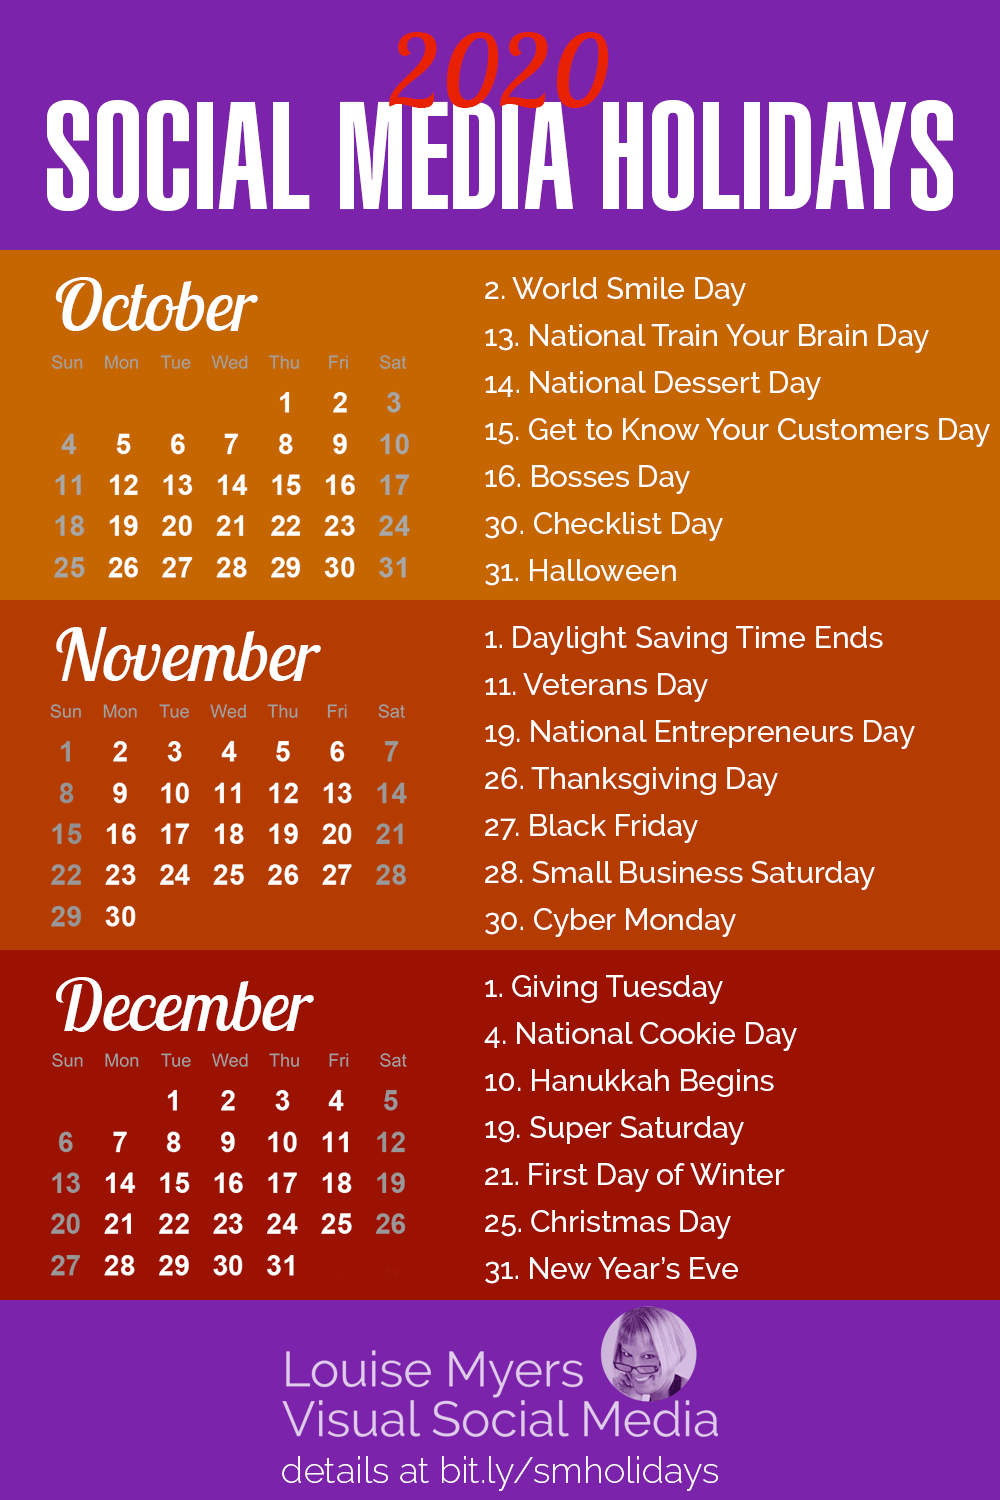 84 Social Media Holidays You Need In 2020: Indispensable! within The Ultimate Social Media Holiday Calendar For 2020